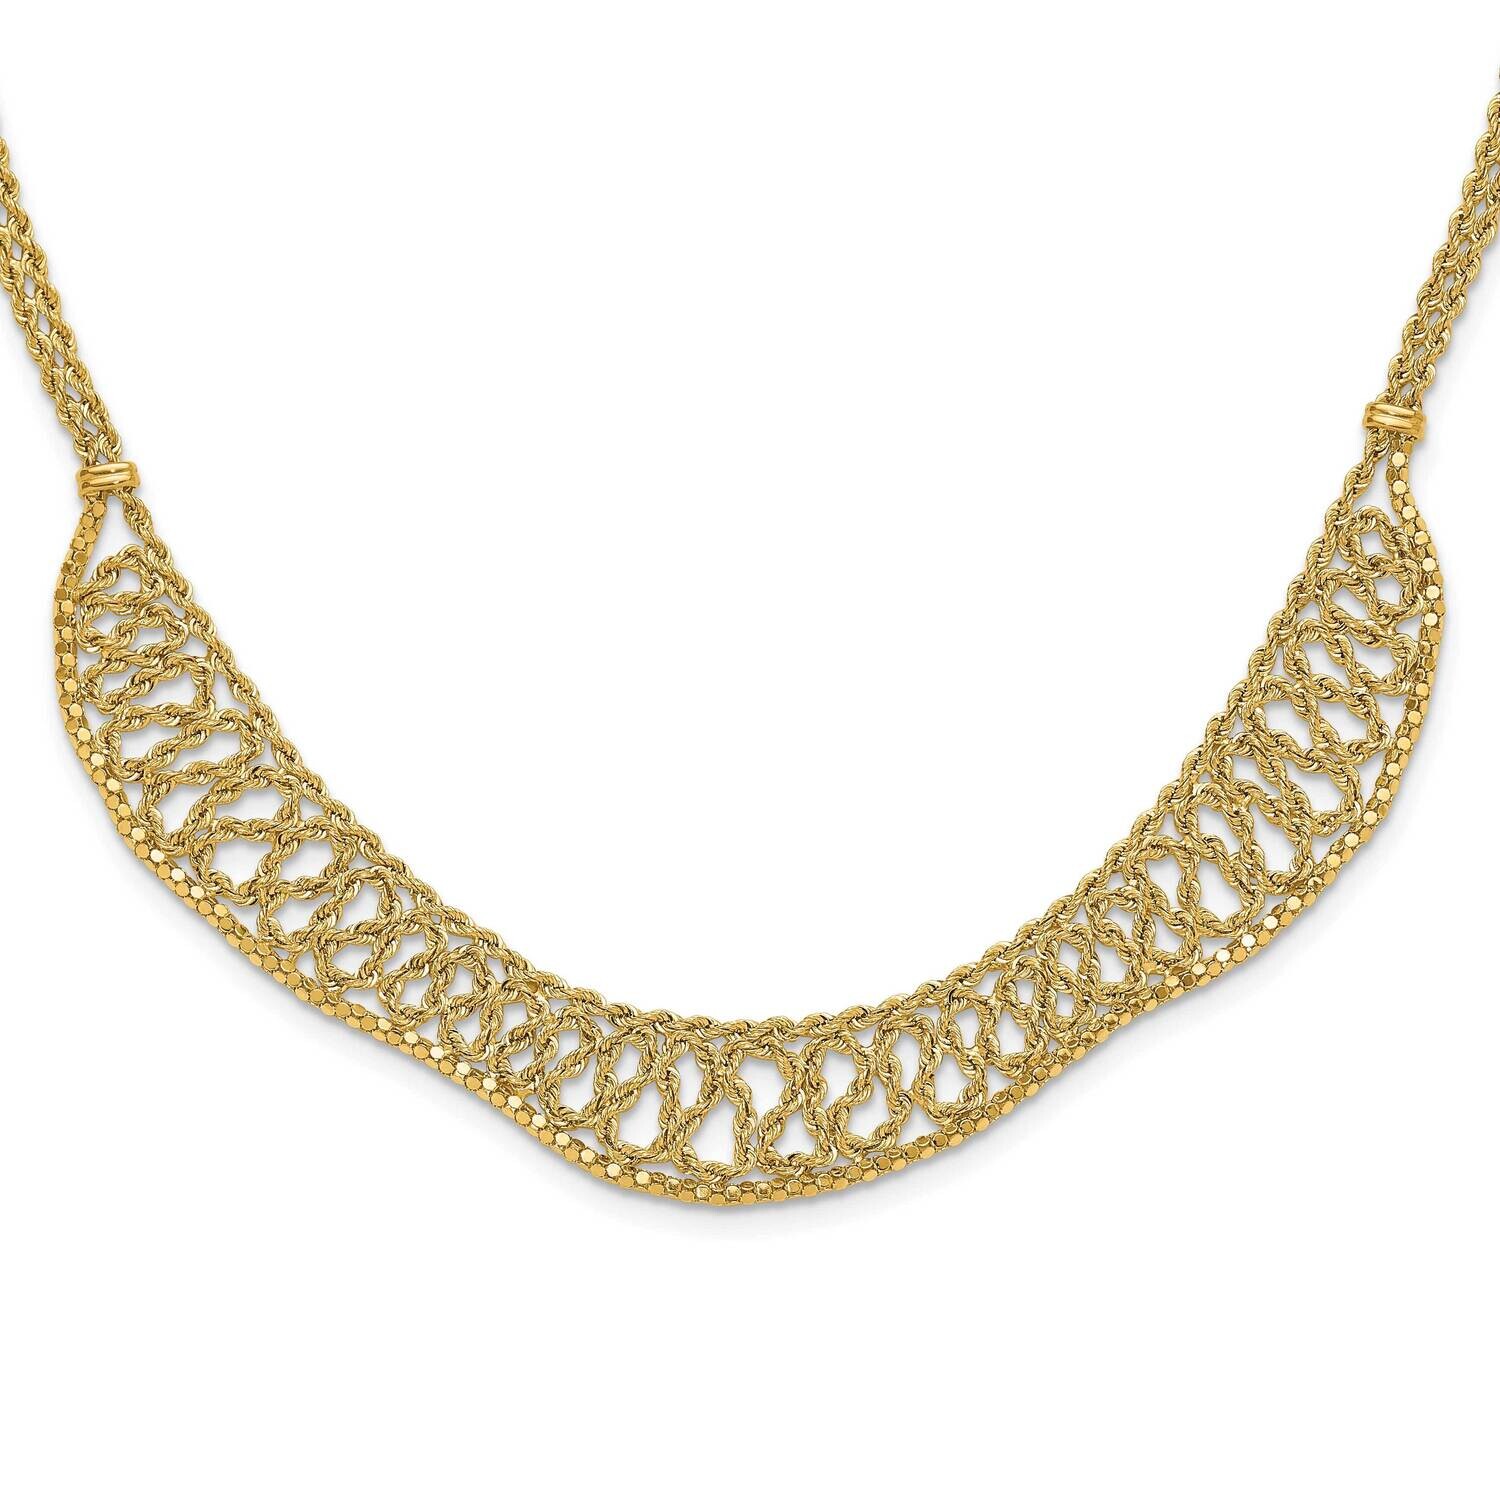 Braided Rope Chain Fancy Front Drape Necklace 14k Gold Diamond-Cut SF3011-17.25